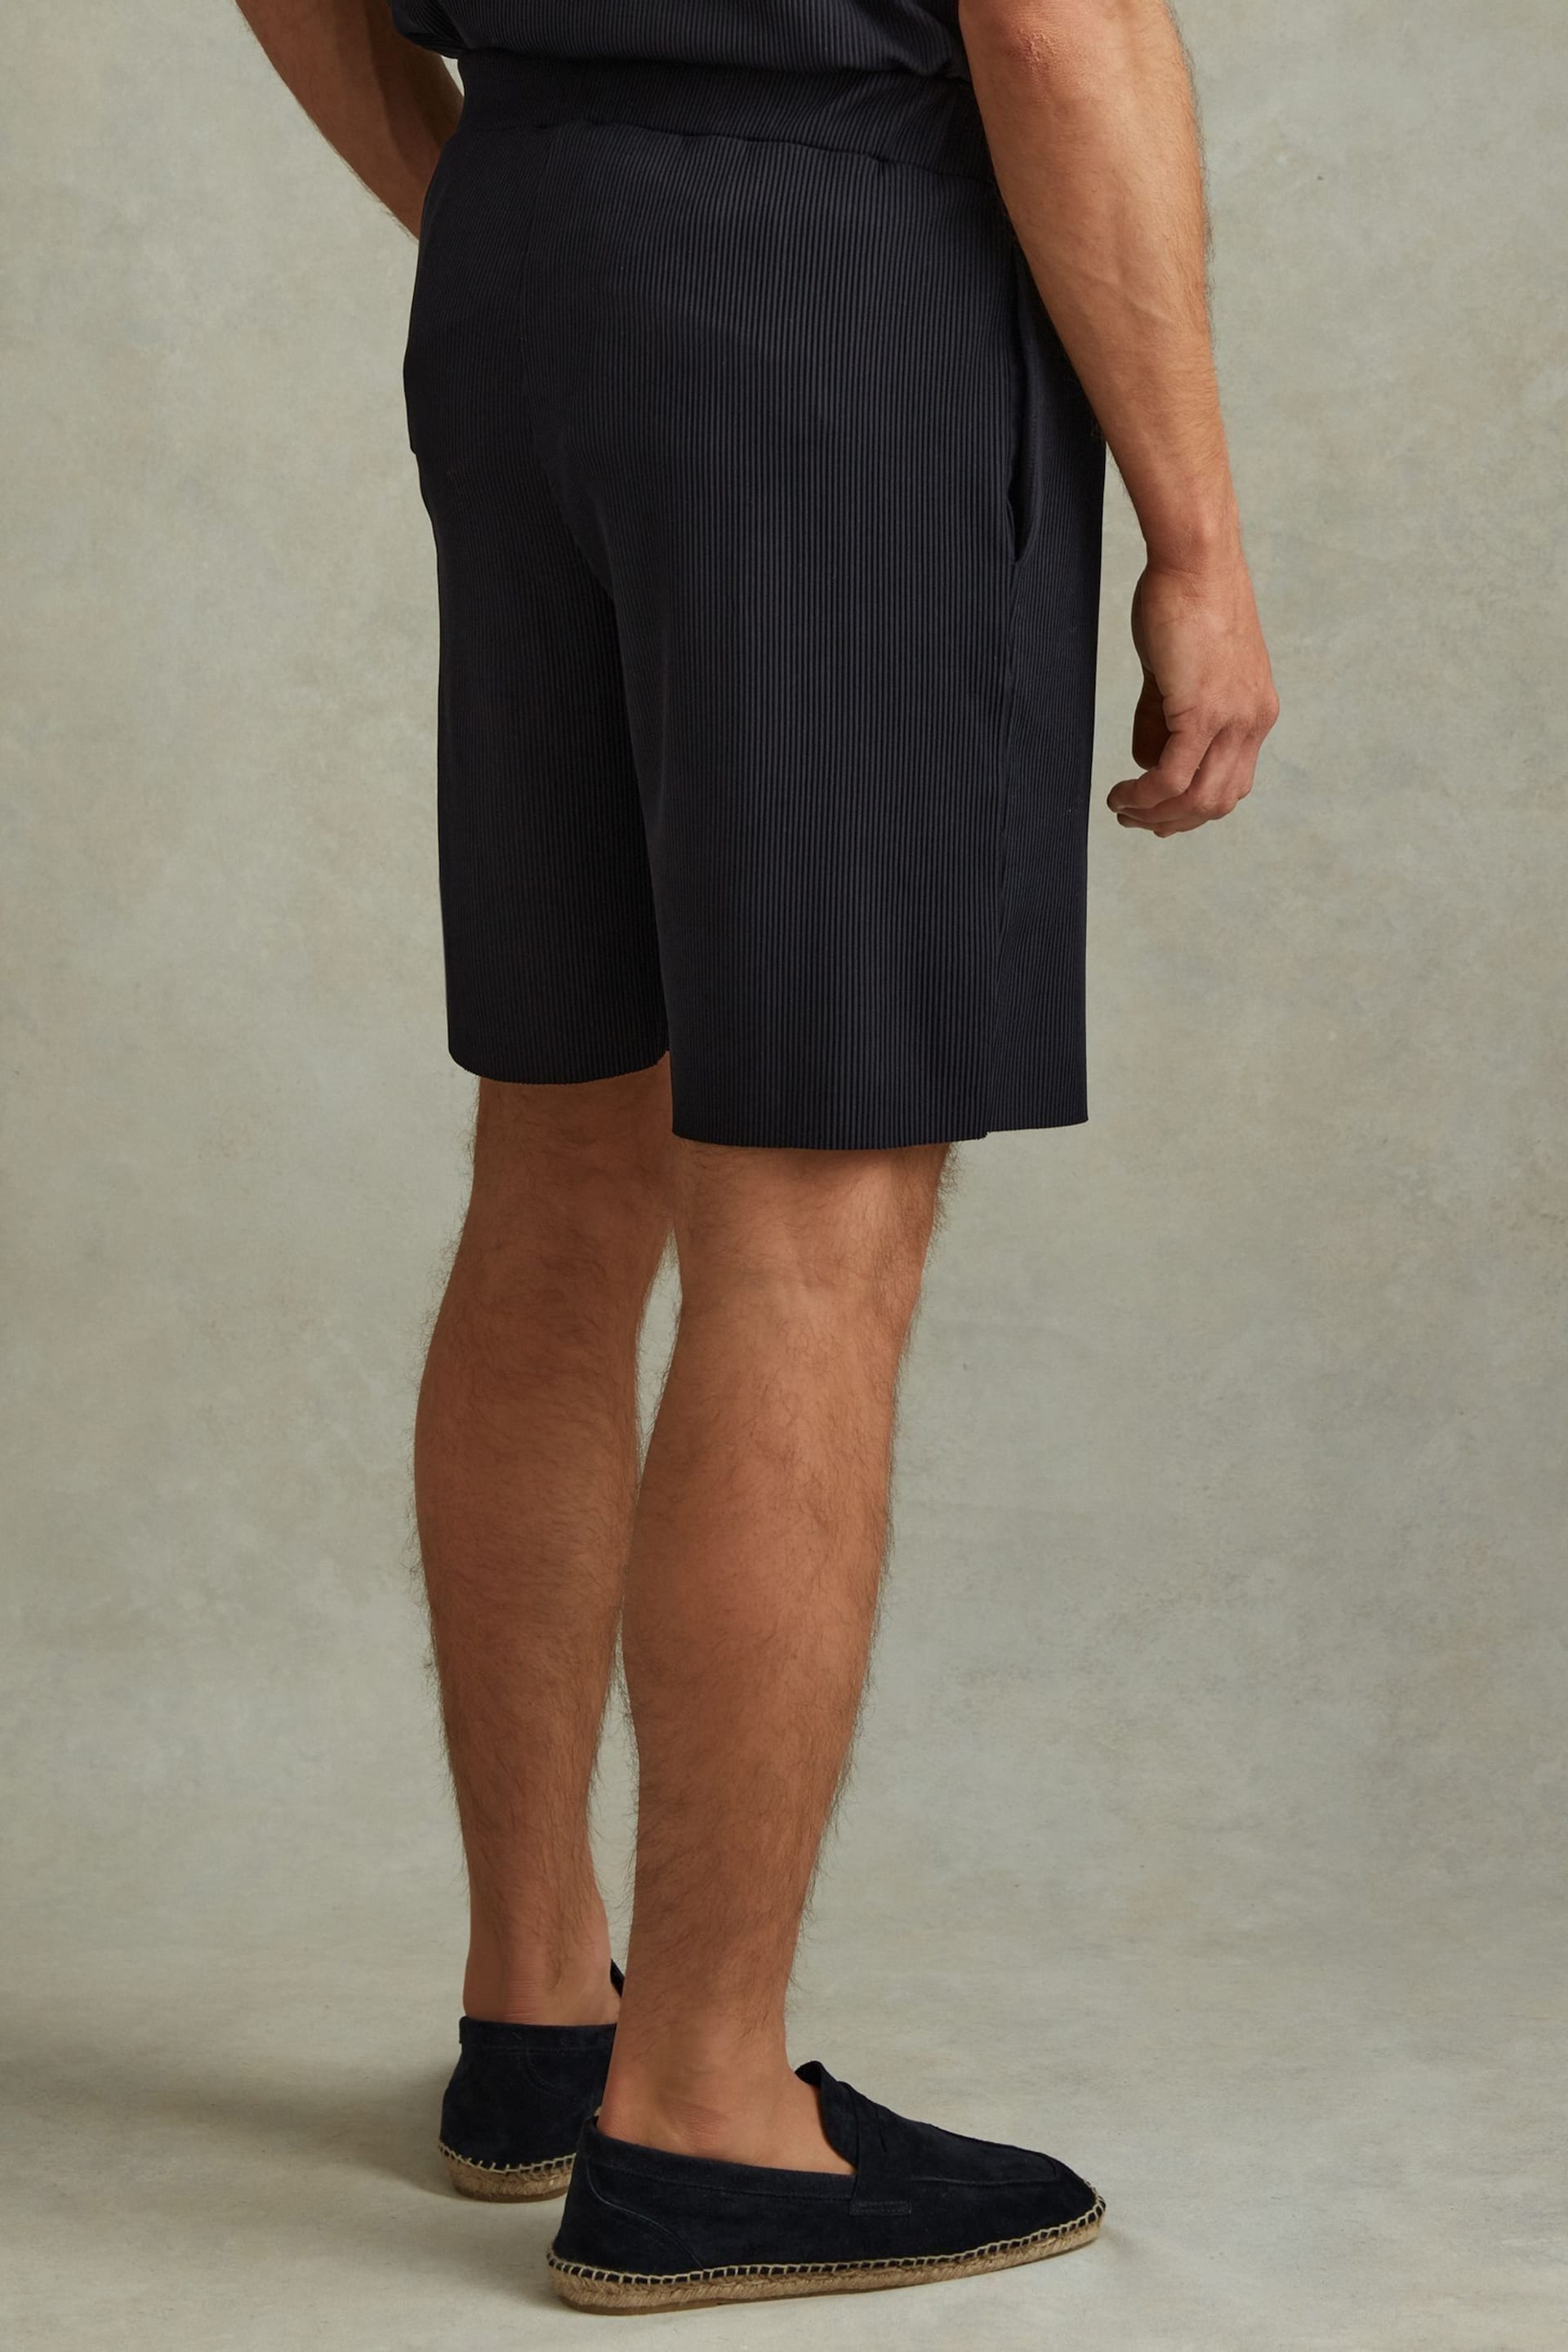 Reiss Navy Conor Ribbed Elasticated Waist Shorts - Image 5 of 5